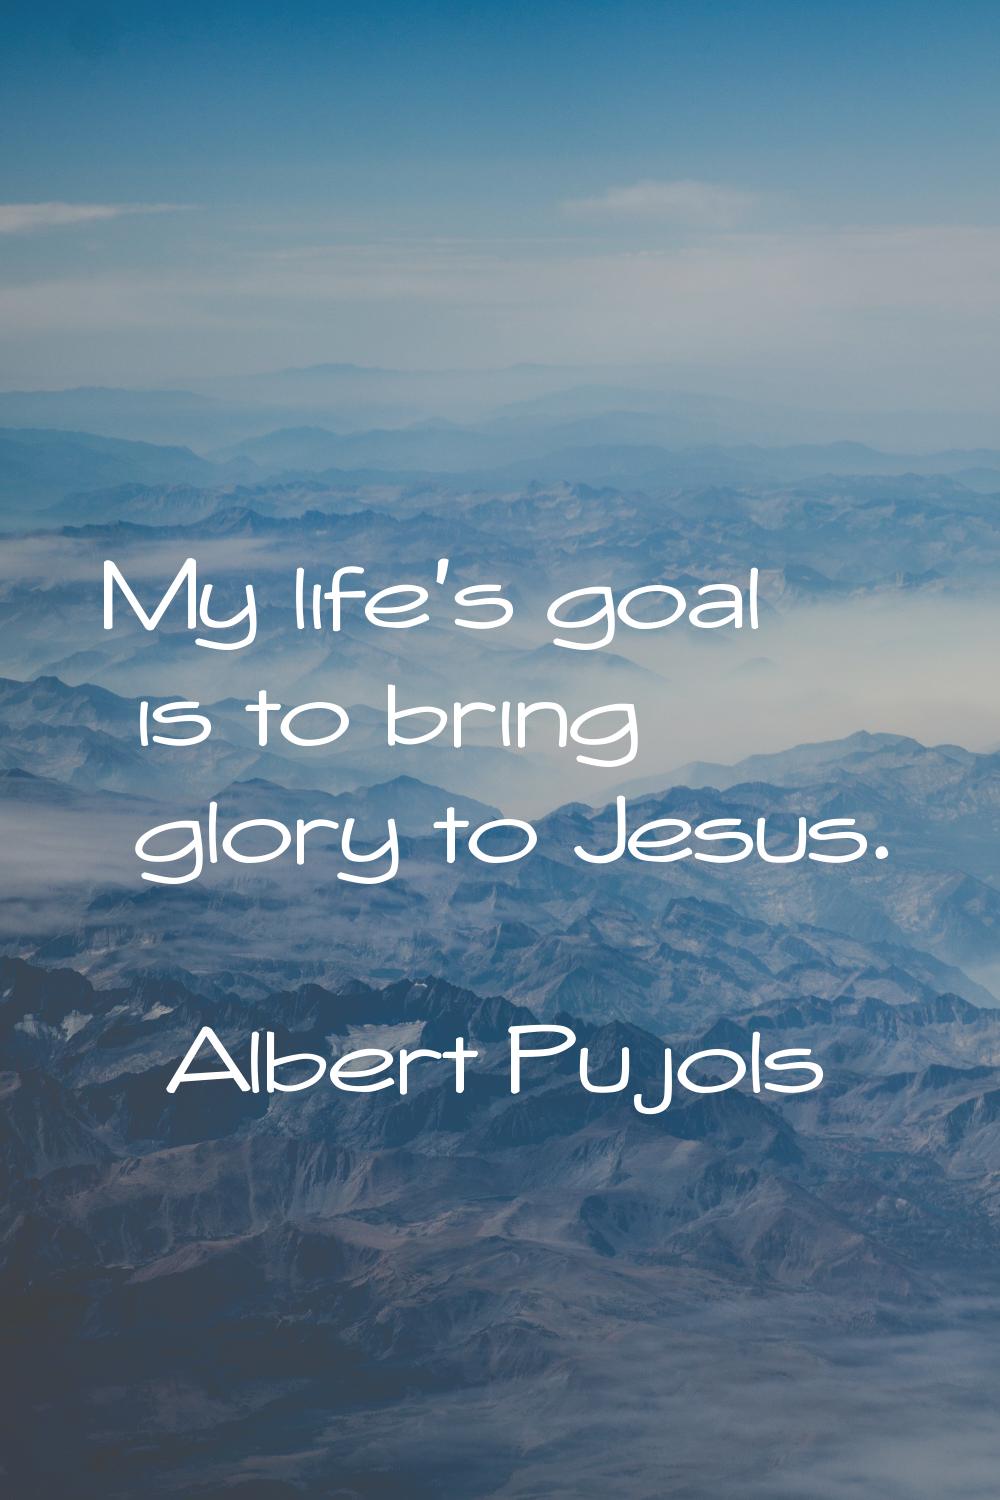 My life's goal is to bring glory to Jesus.